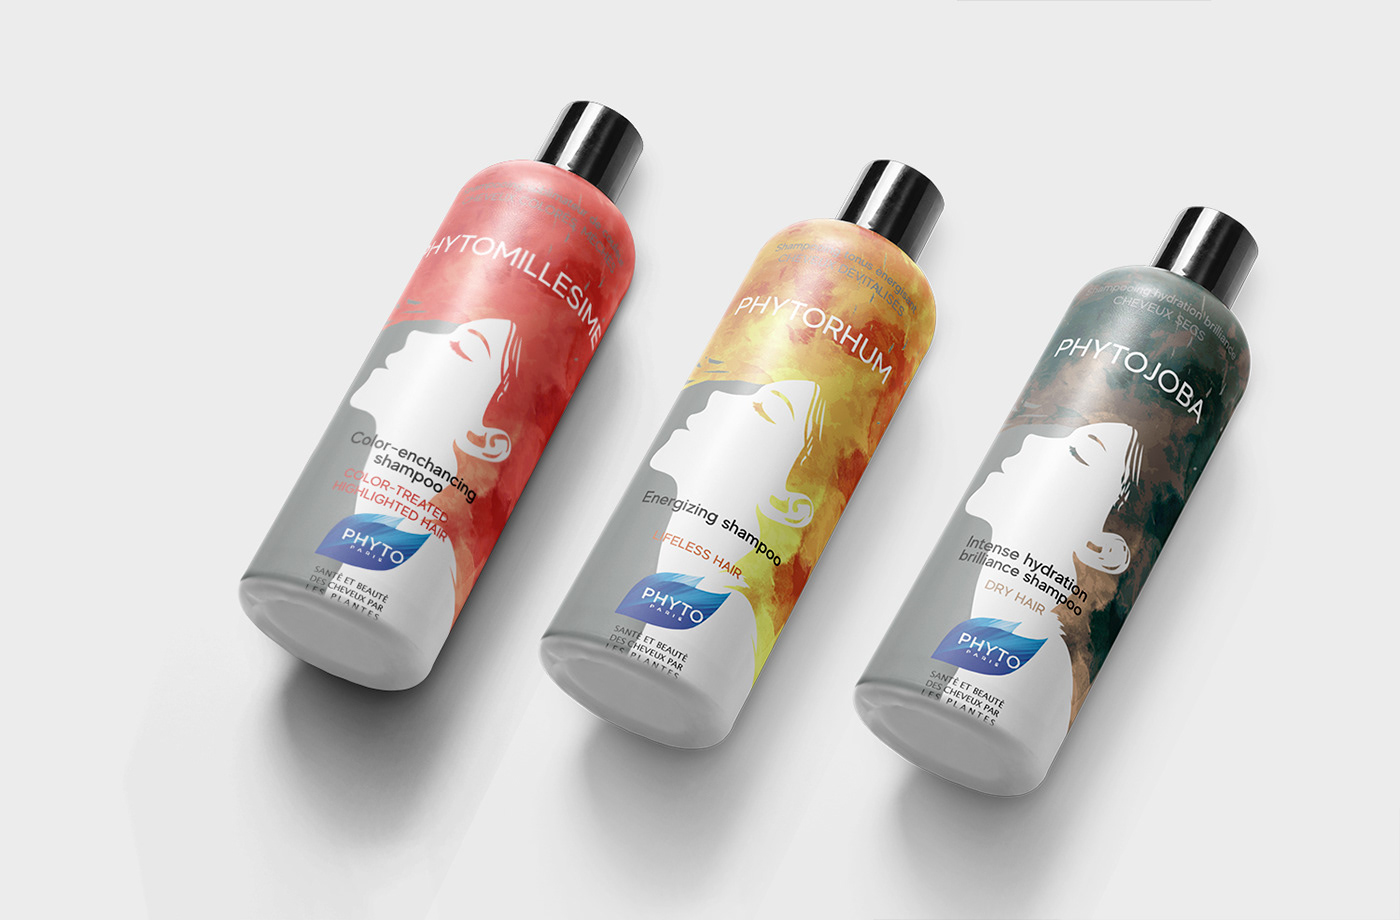 branding  design hair products Advertising  phyto curly graphic cute girly